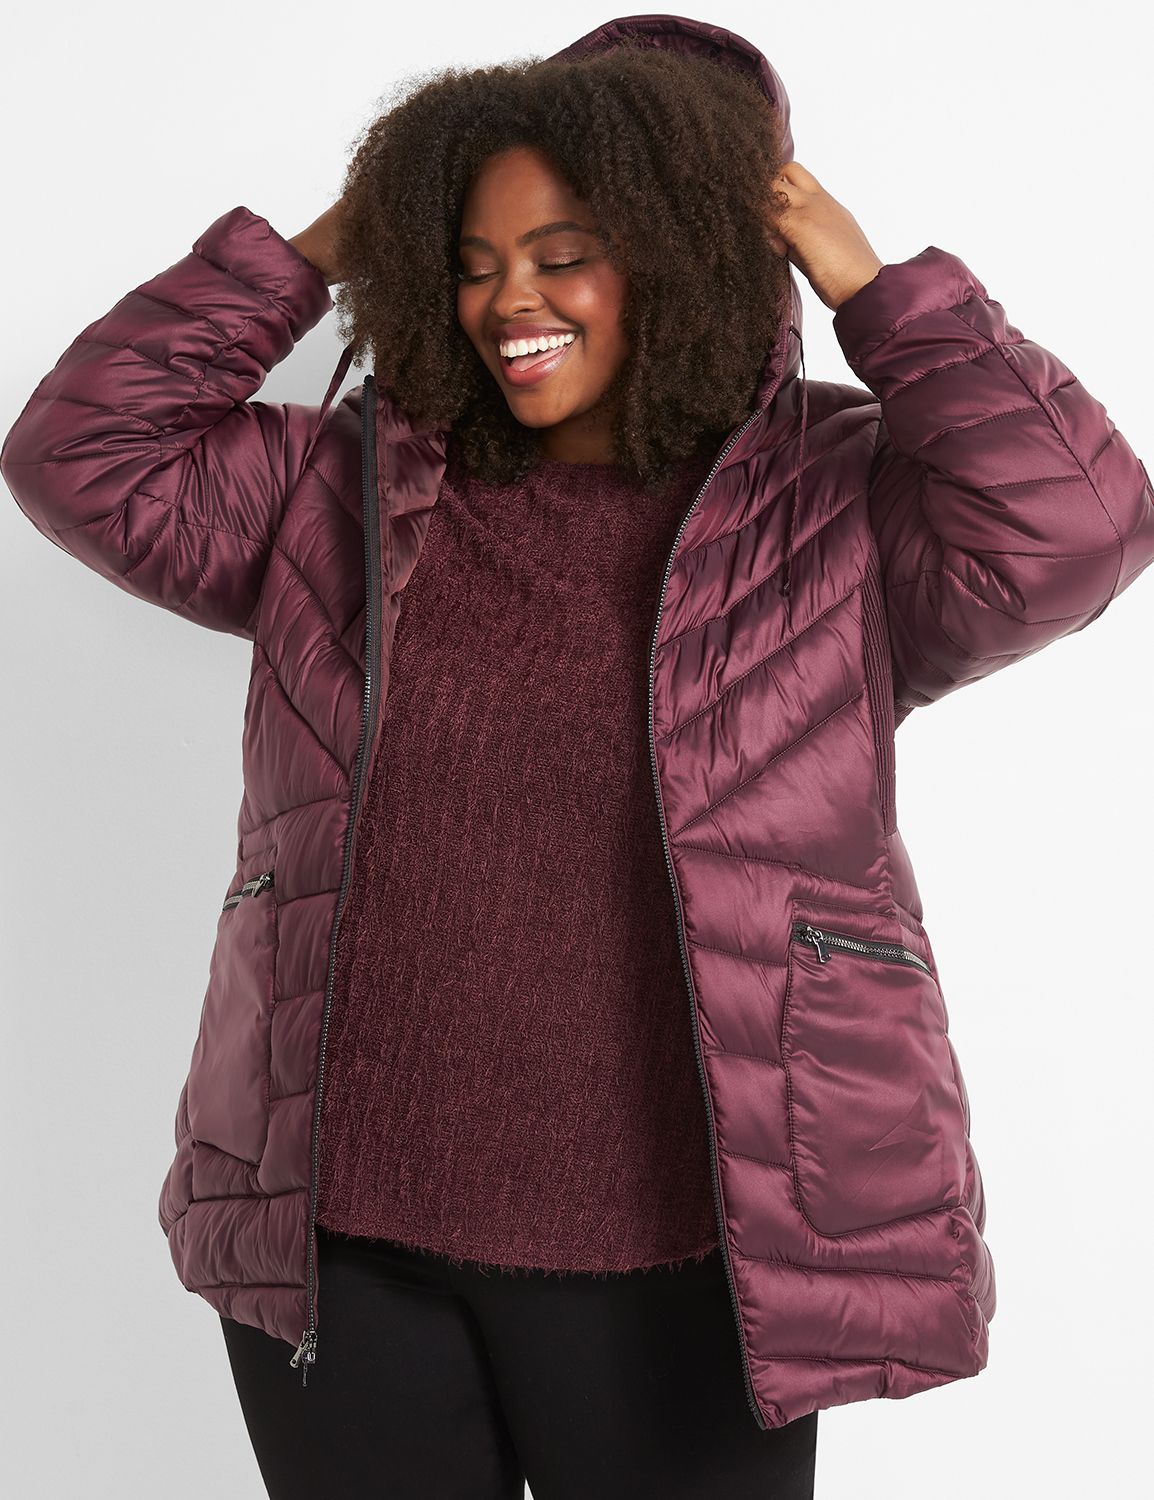 Addition Elegance Dominerende Plus Size Women's Coats: Leather, Puffers & Wraps | Lane Bryant